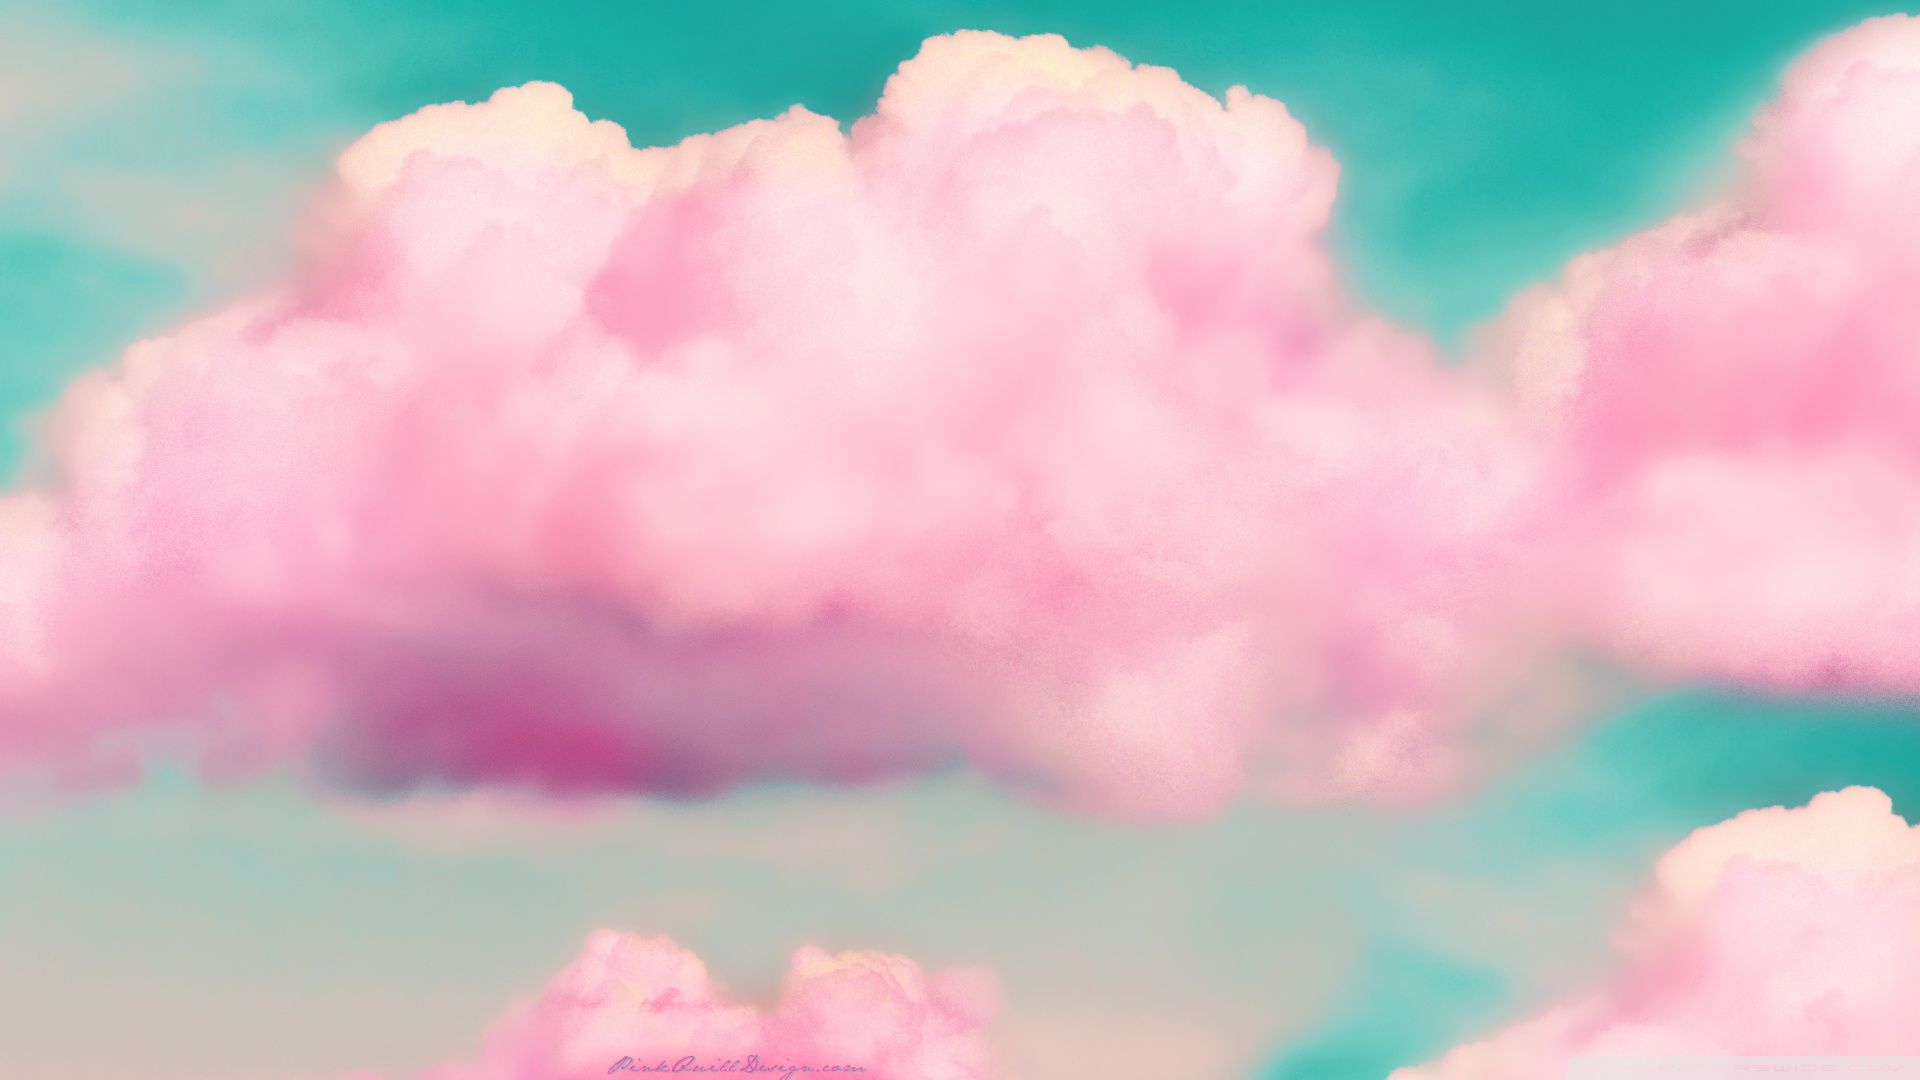 Pastel Pink Aesthetic PC Wallpaper. Pink clouds wallpaper, Cloud wallpaper, Pink wallpaper